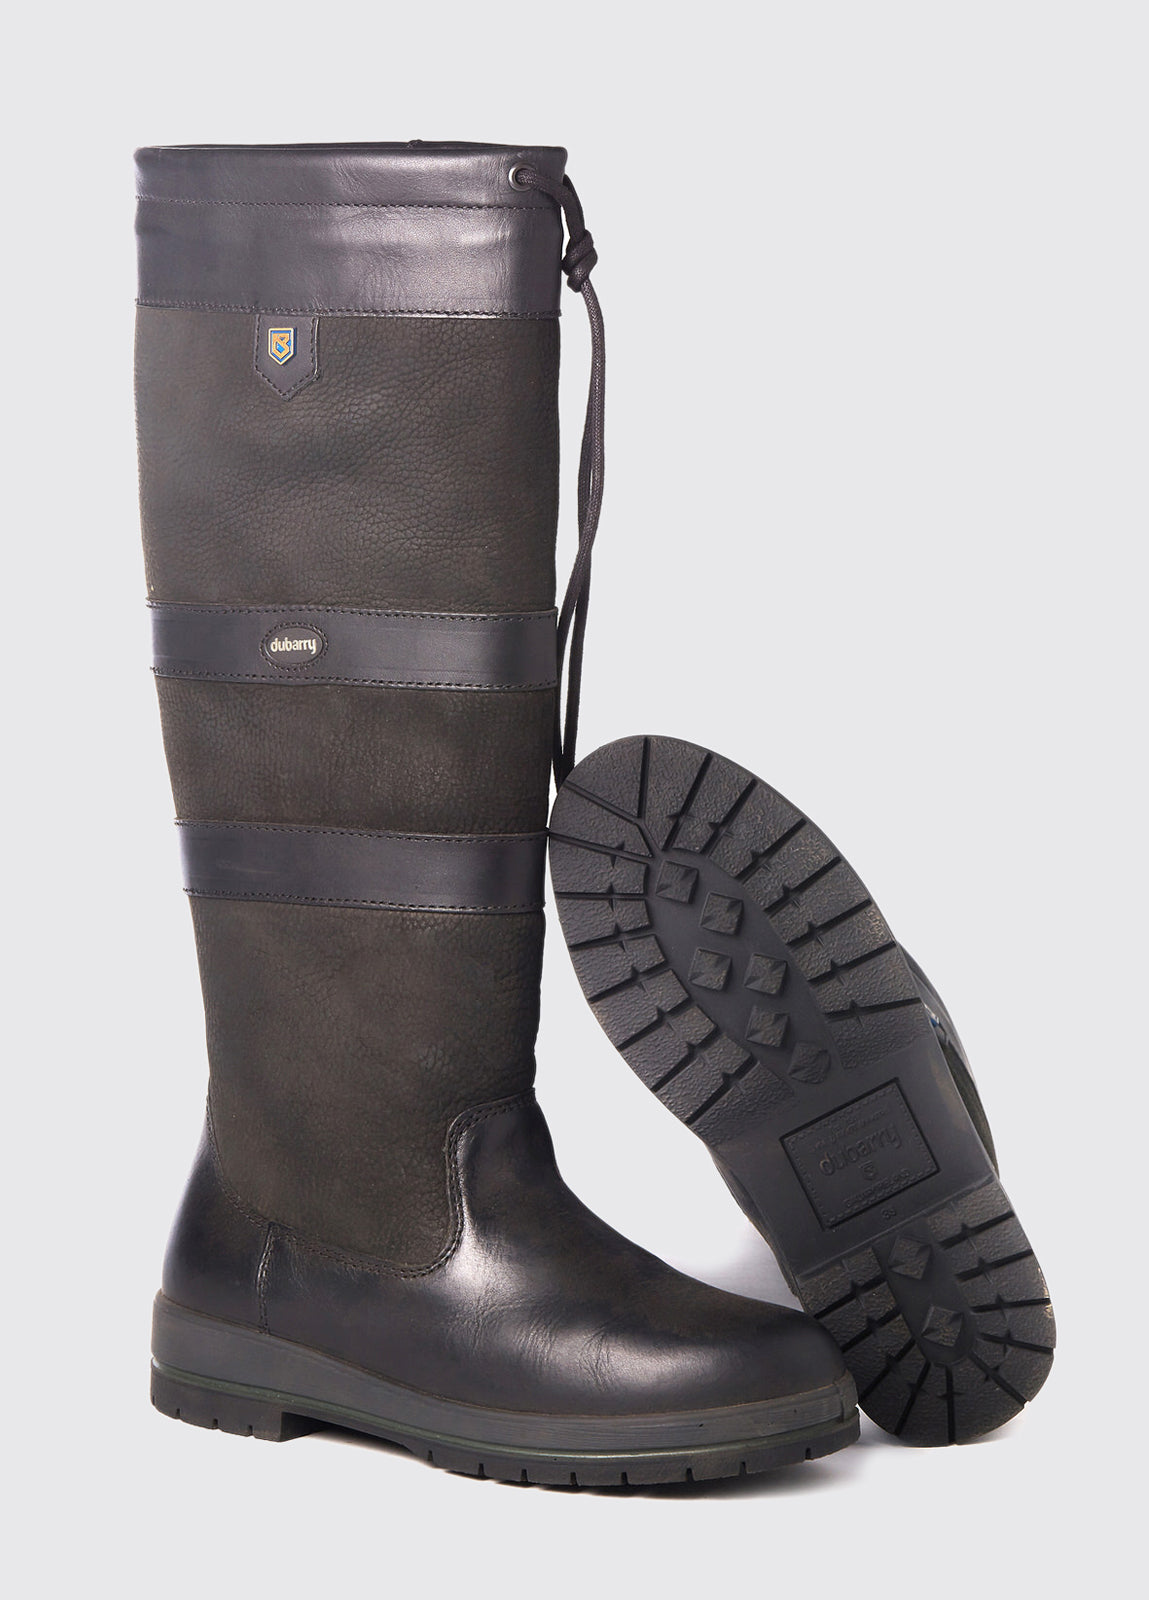 Dubarry Galway Country Boot in Black